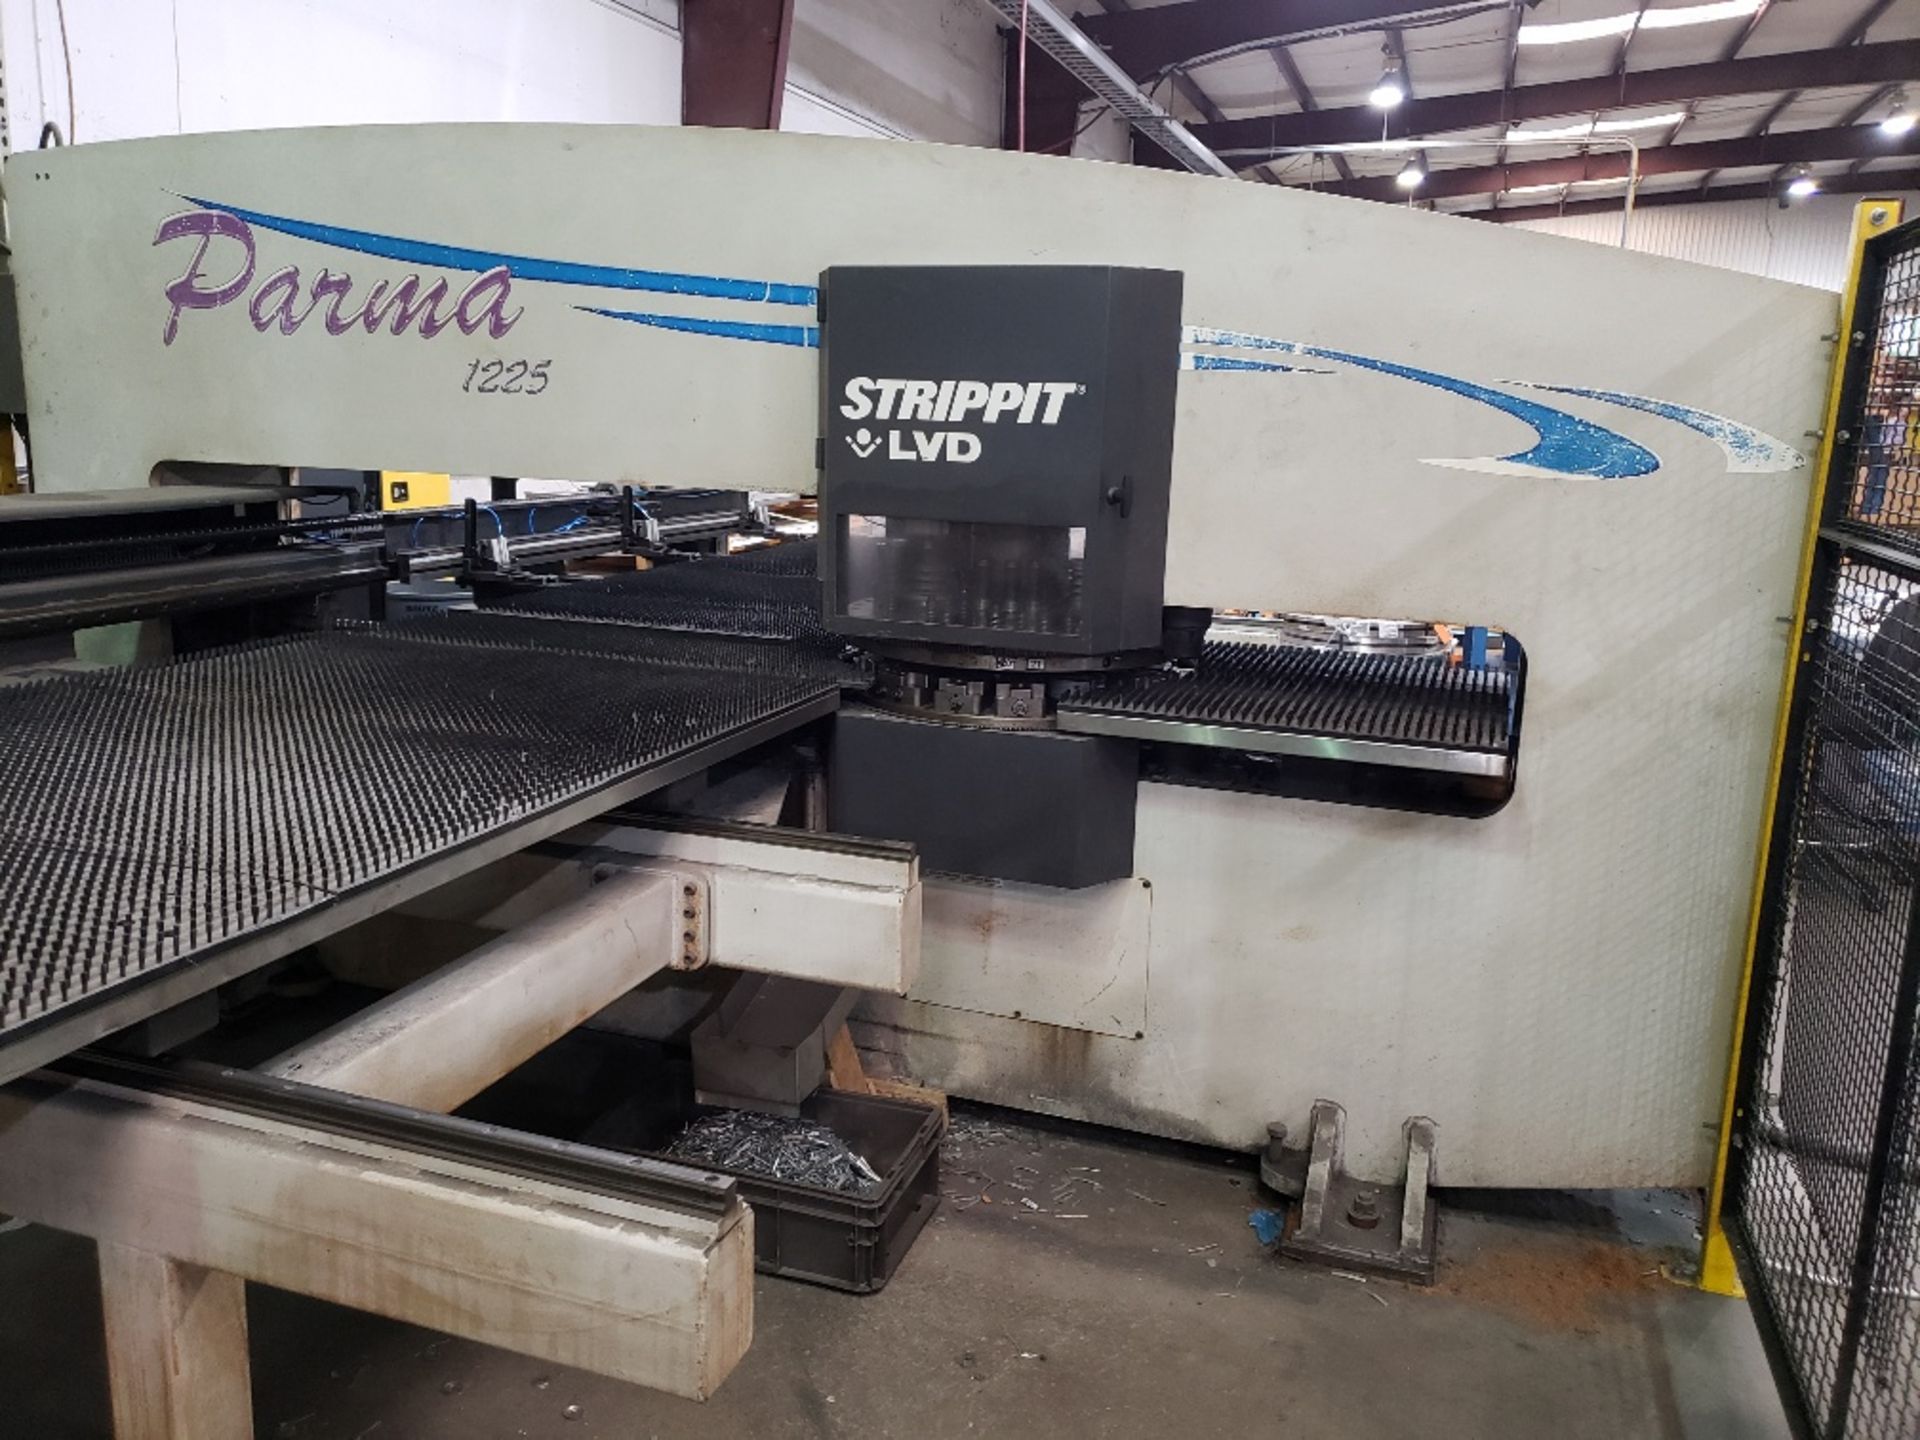 20 Ton Strippit Model Parma 1225 CNC Turret **Loading Fee Due the "ERRA" DFW Movers, $3,750.00** - Image 4 of 12